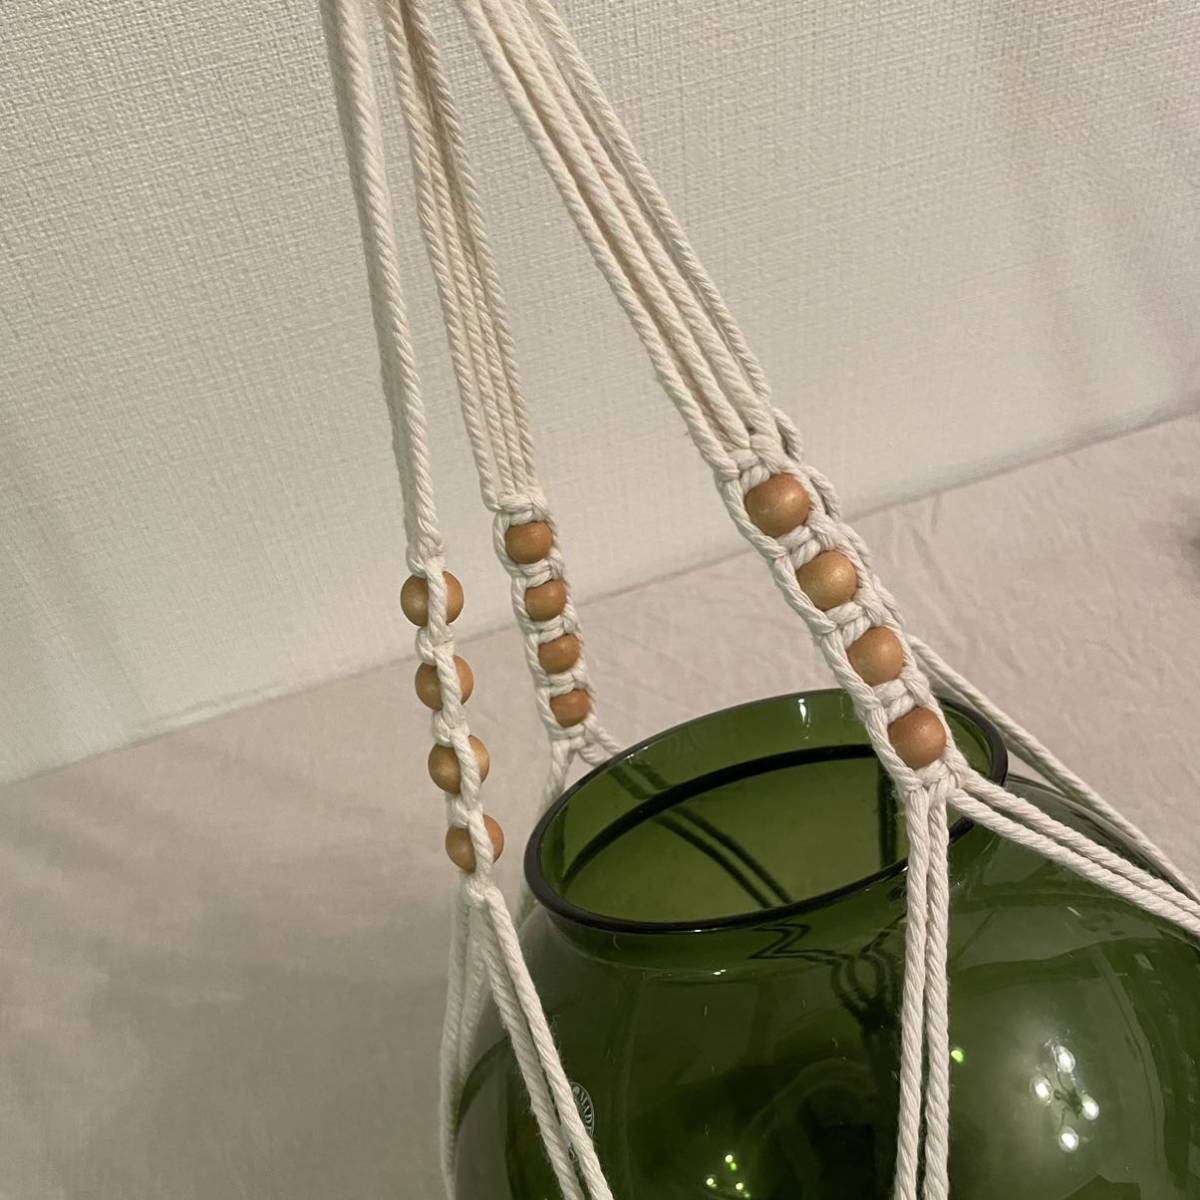 mak lame plan to hanger hanging plant hanging lowering cord unused natural beads interior miscellaneous goods flower base pot cover 